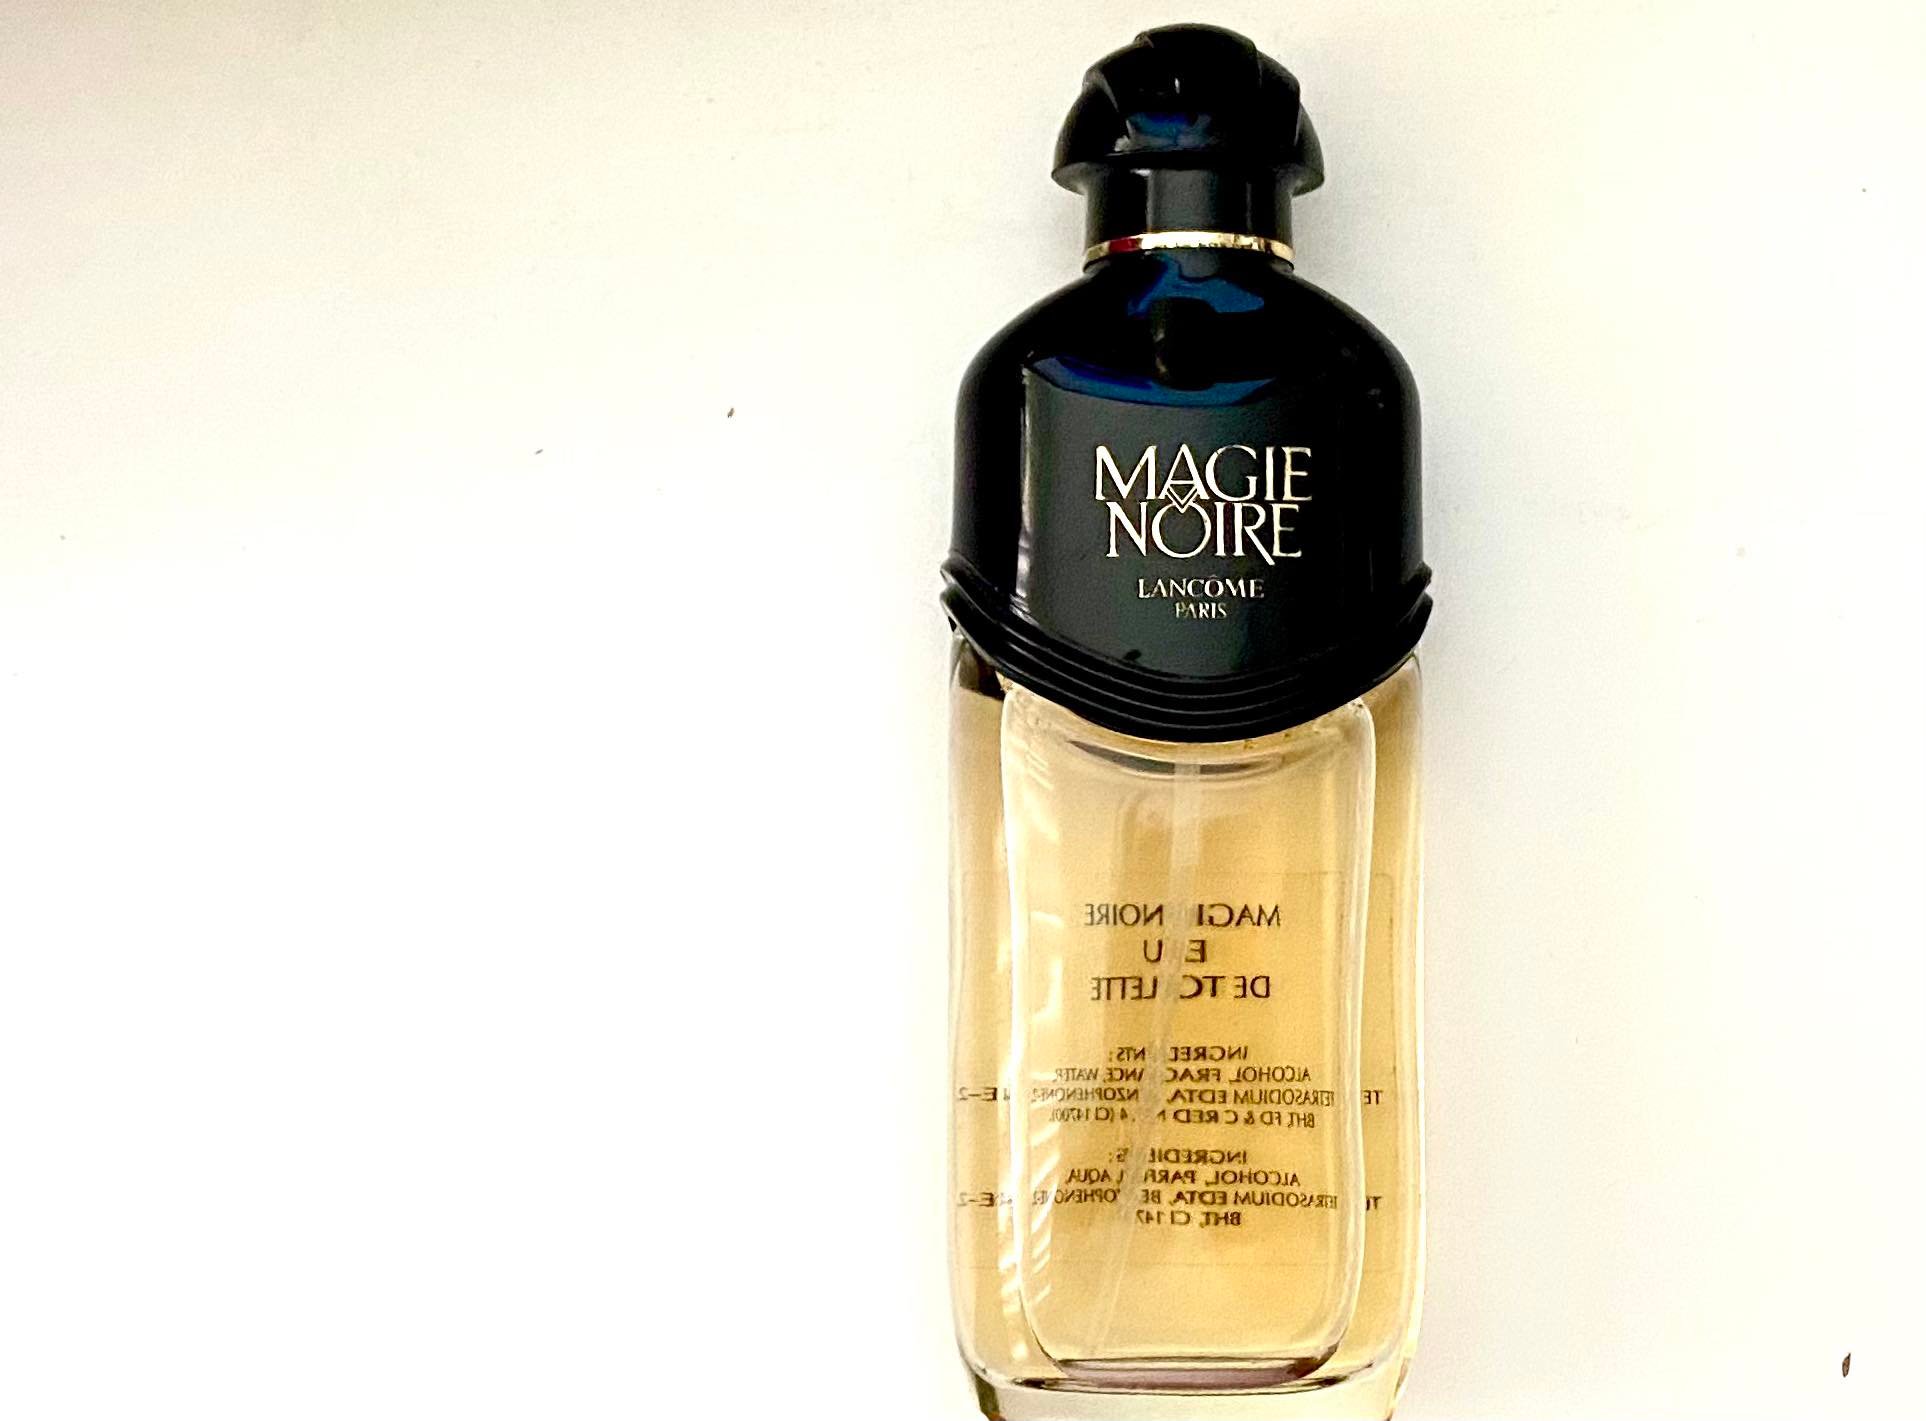 Magie Noire by Lancome | Perfume Posse Remembering the Floral Chypre